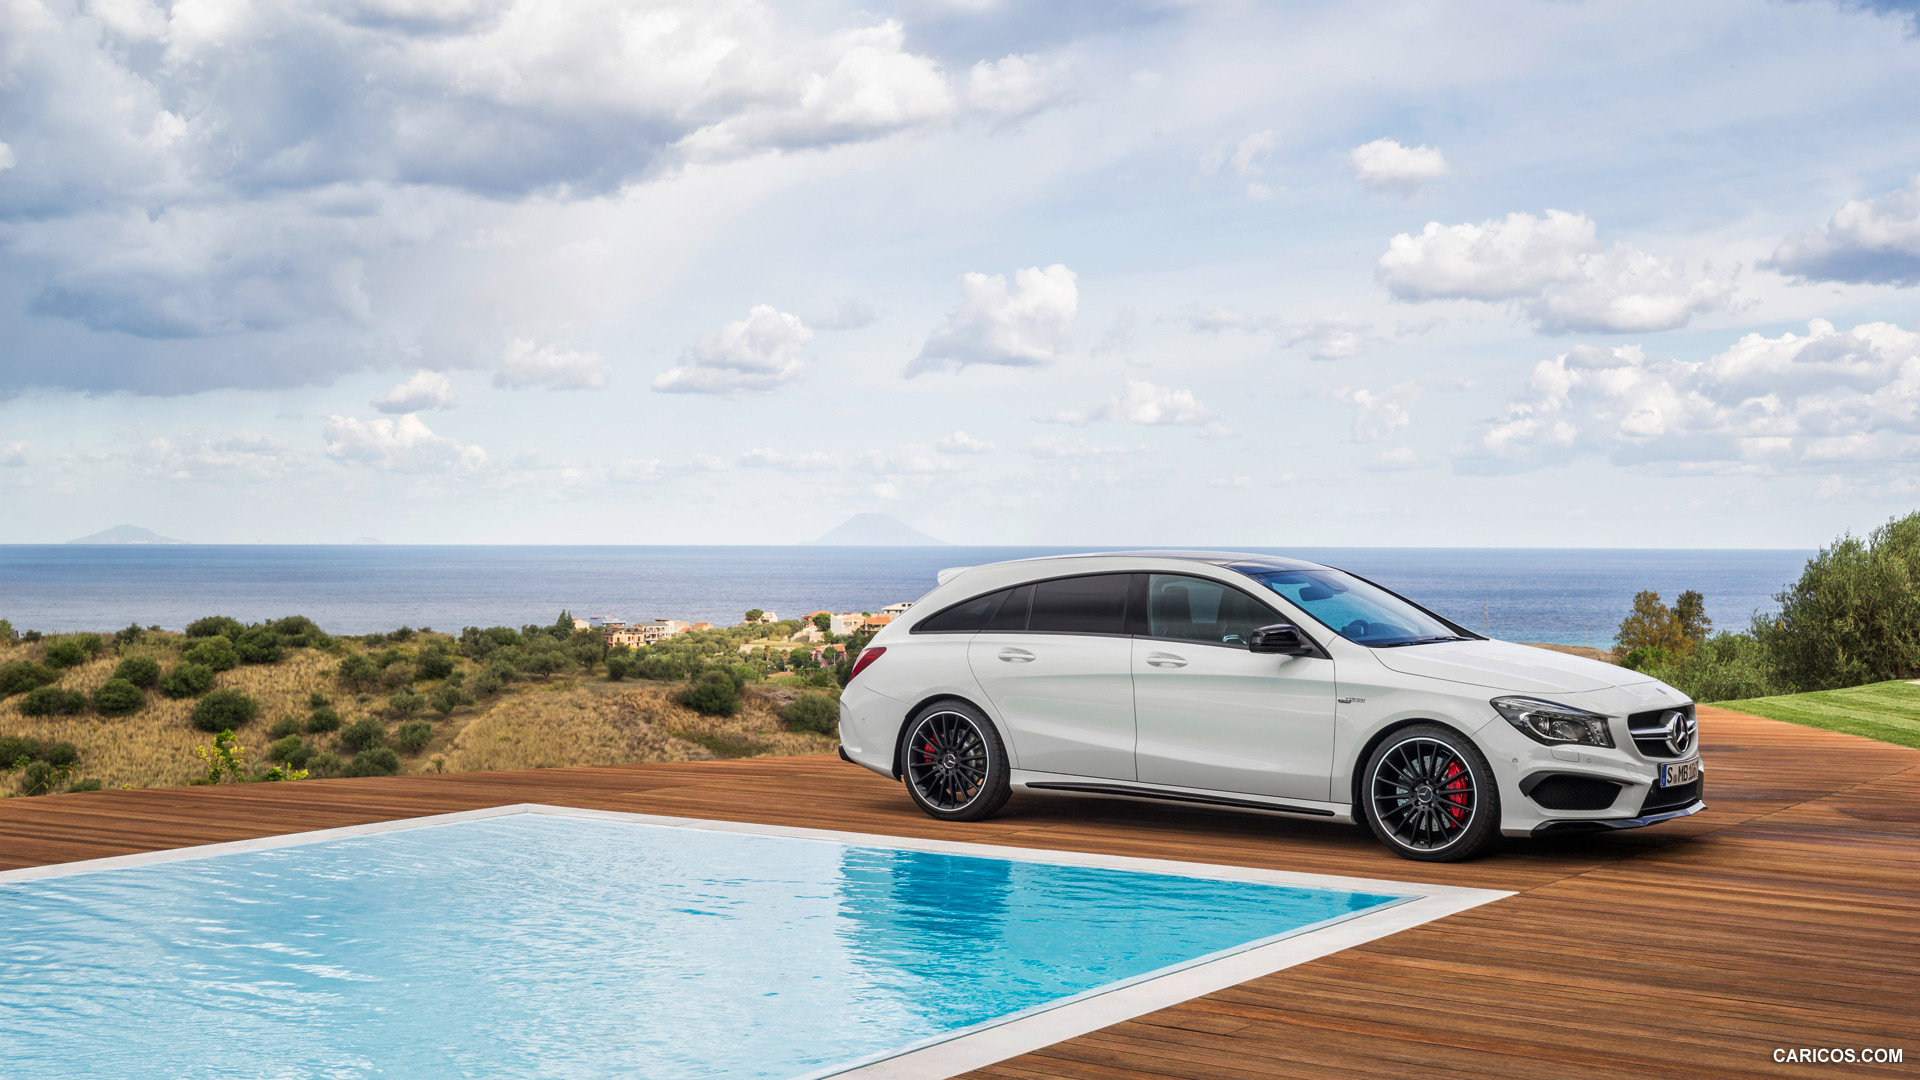 2015 Mercedes-Benz CLA 45 AMG Shooting Brake (Calcite White) - Side, #35 of 70